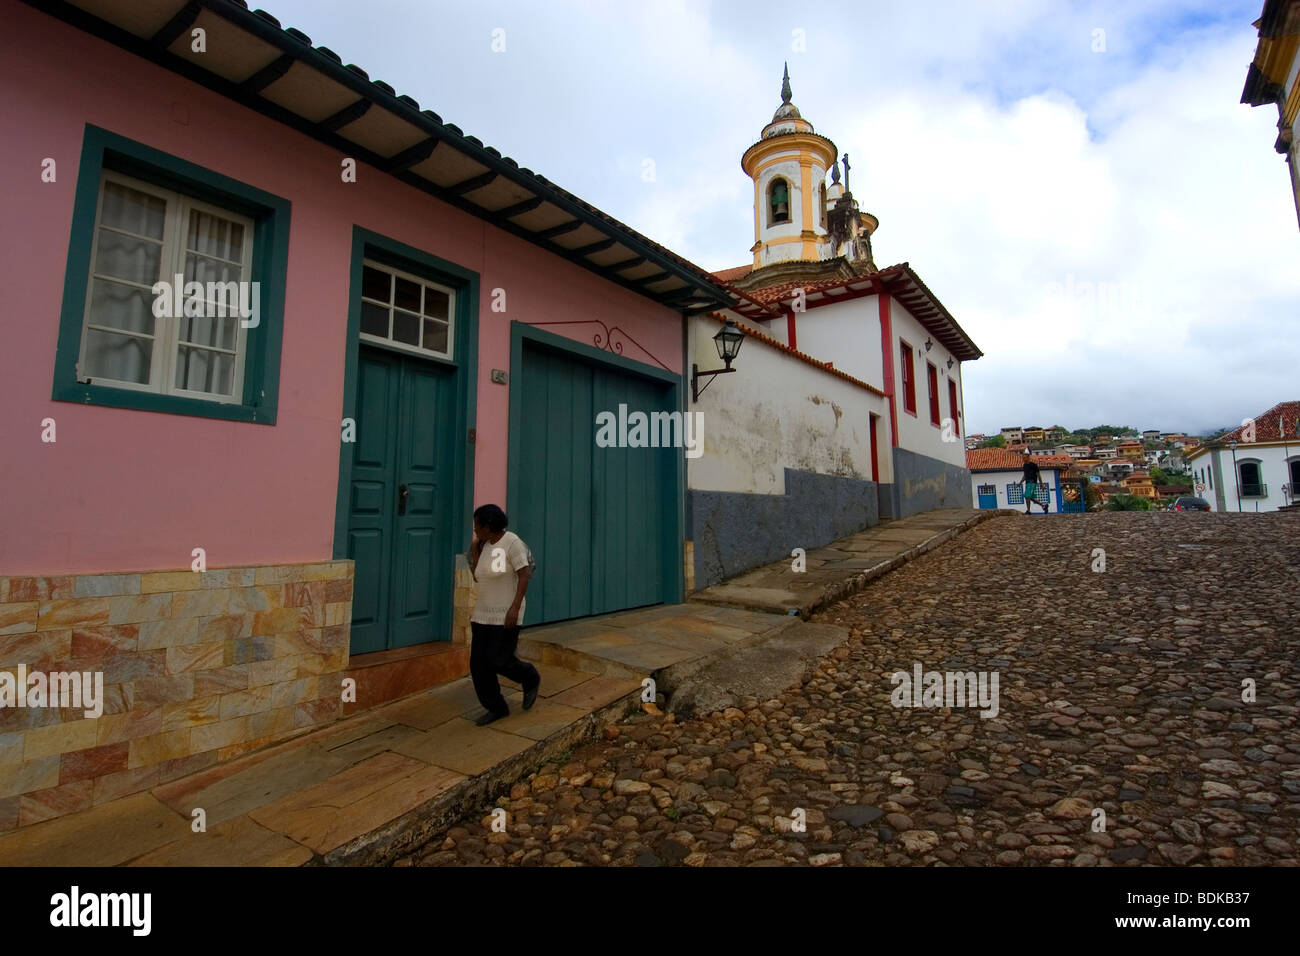 Streets with colonial portuguese buildings, historical world heritage site, Mariana, Minas Gerais, Brazil Stock Photo